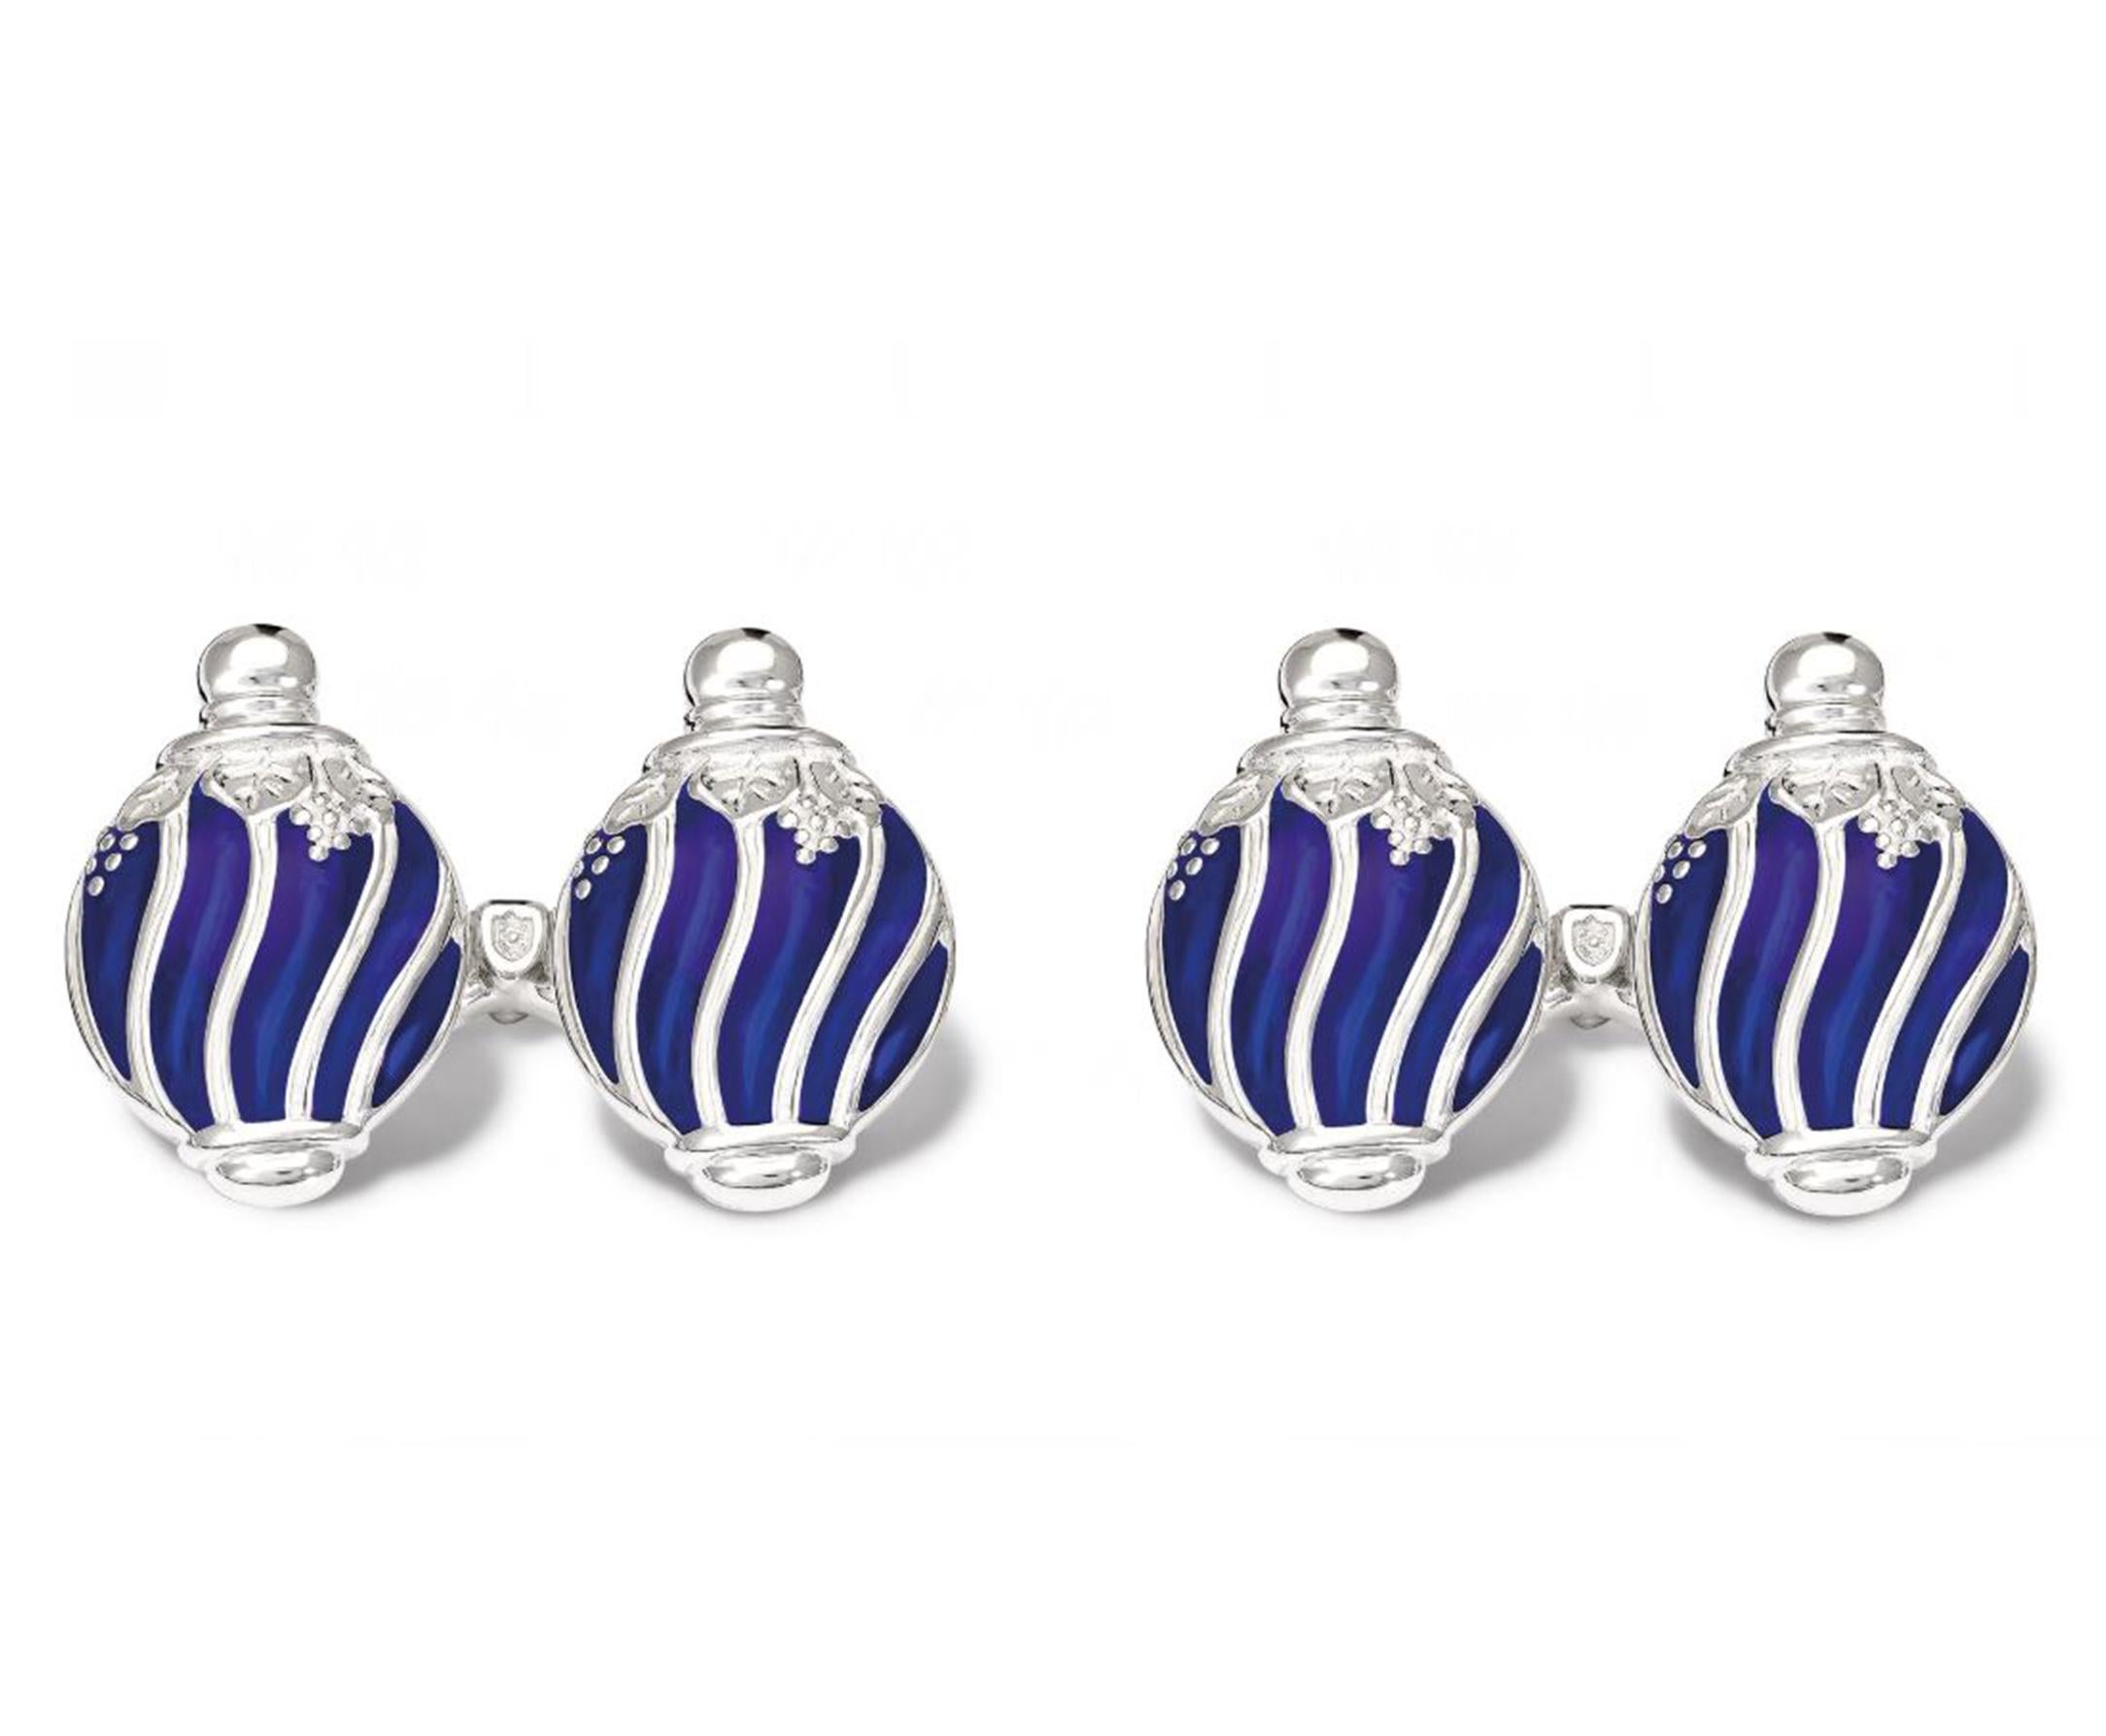 Villa Tasca cufflink double ended in silver and enamelled solid dark blue. Villa Tasca, Palermo was built in the 1500s and is surrounded by its incredible garden. The finials on the top of the house lent themselves perfectly to be transformed into